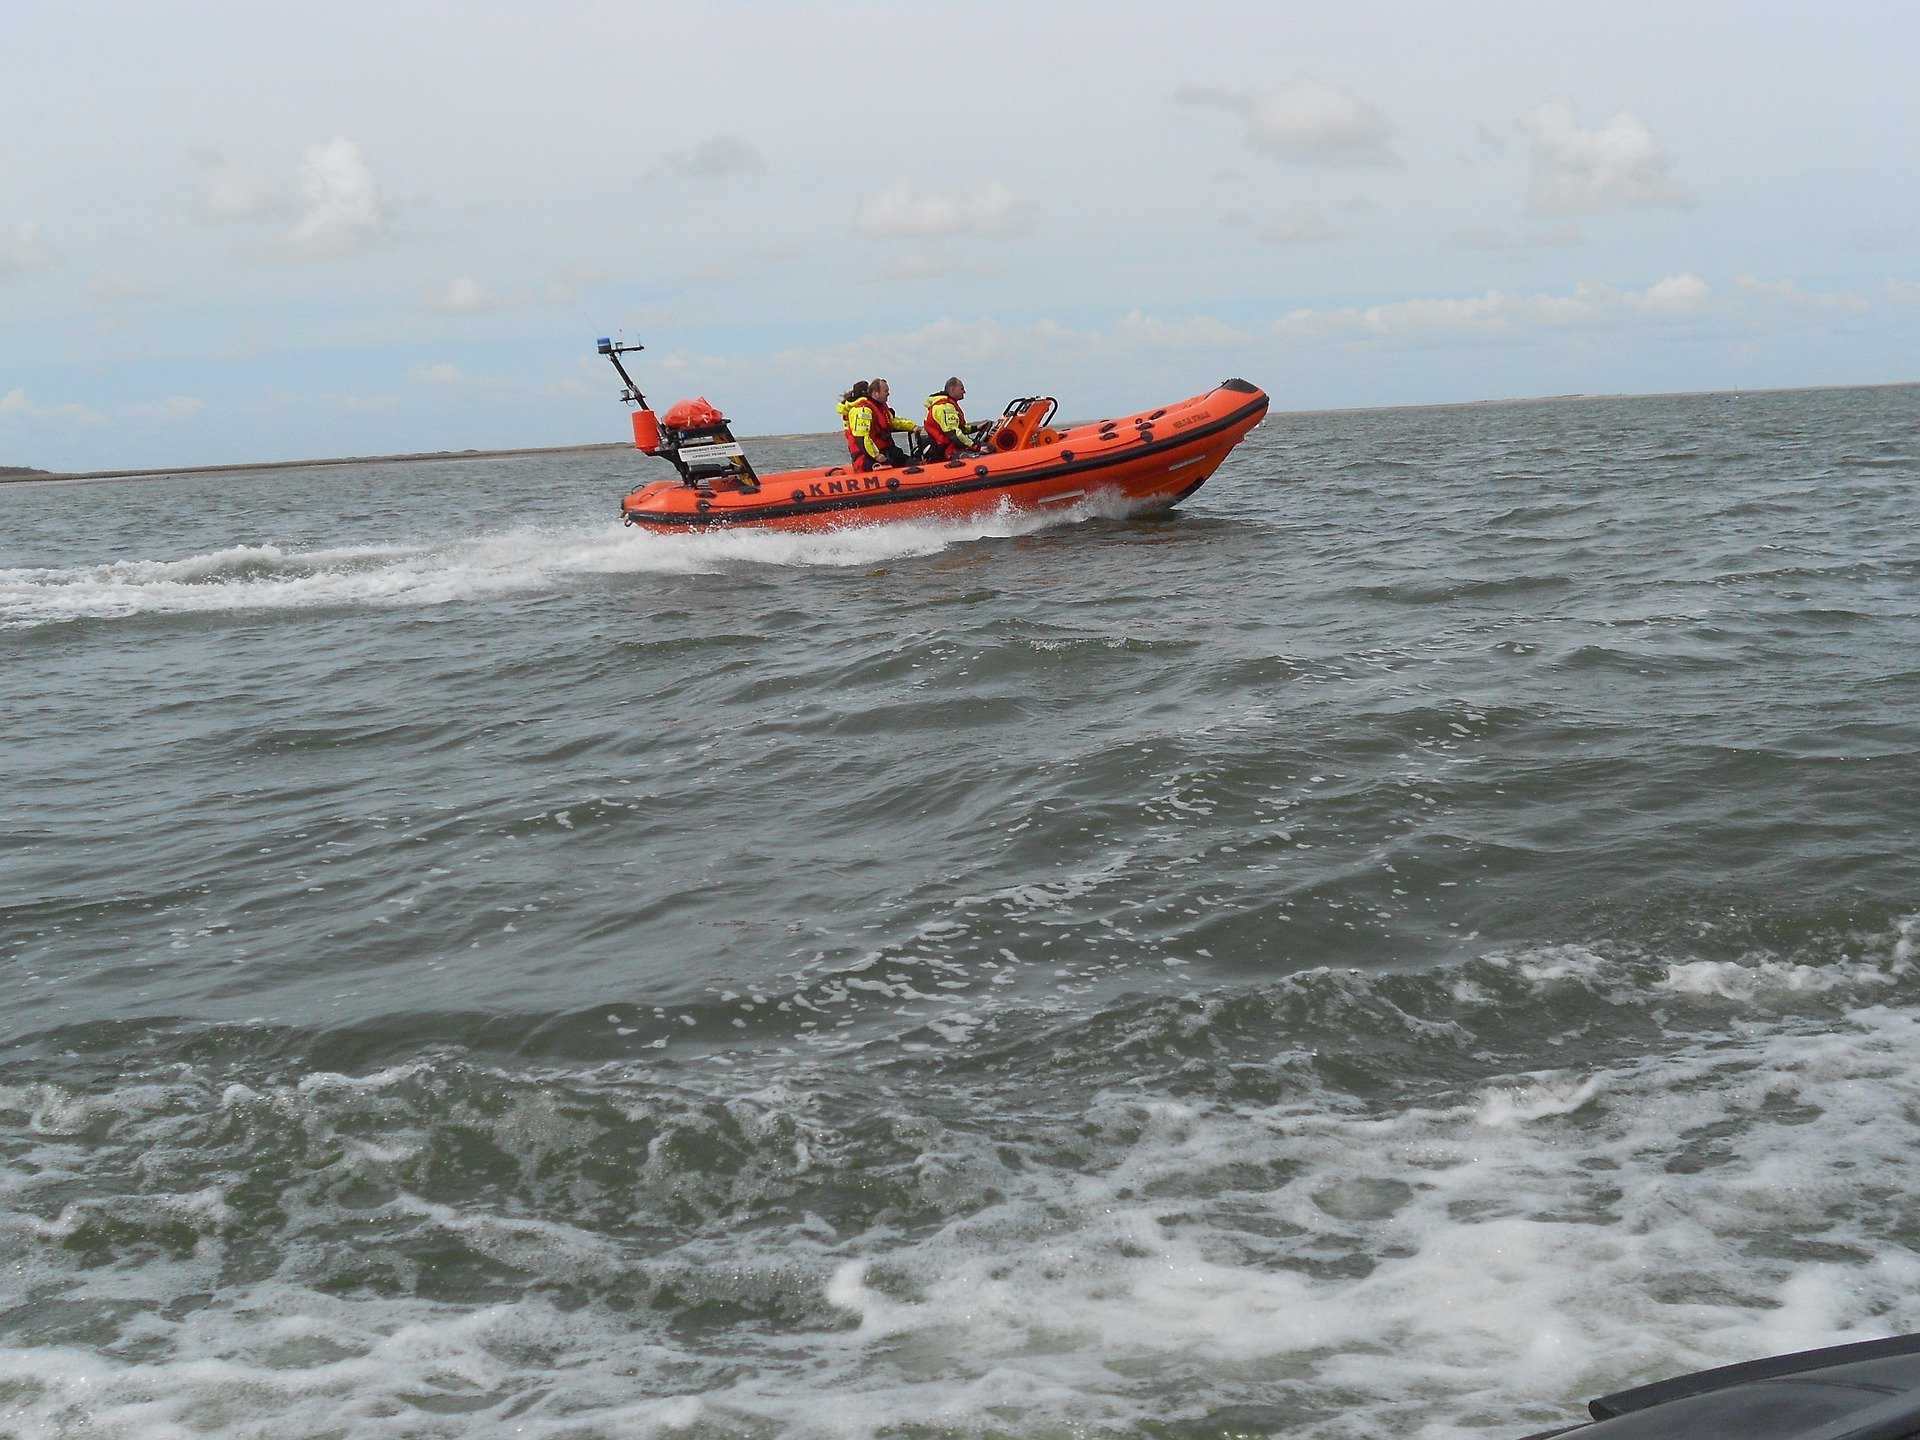 Rescue team on a lifeboat | Source: Pixabay